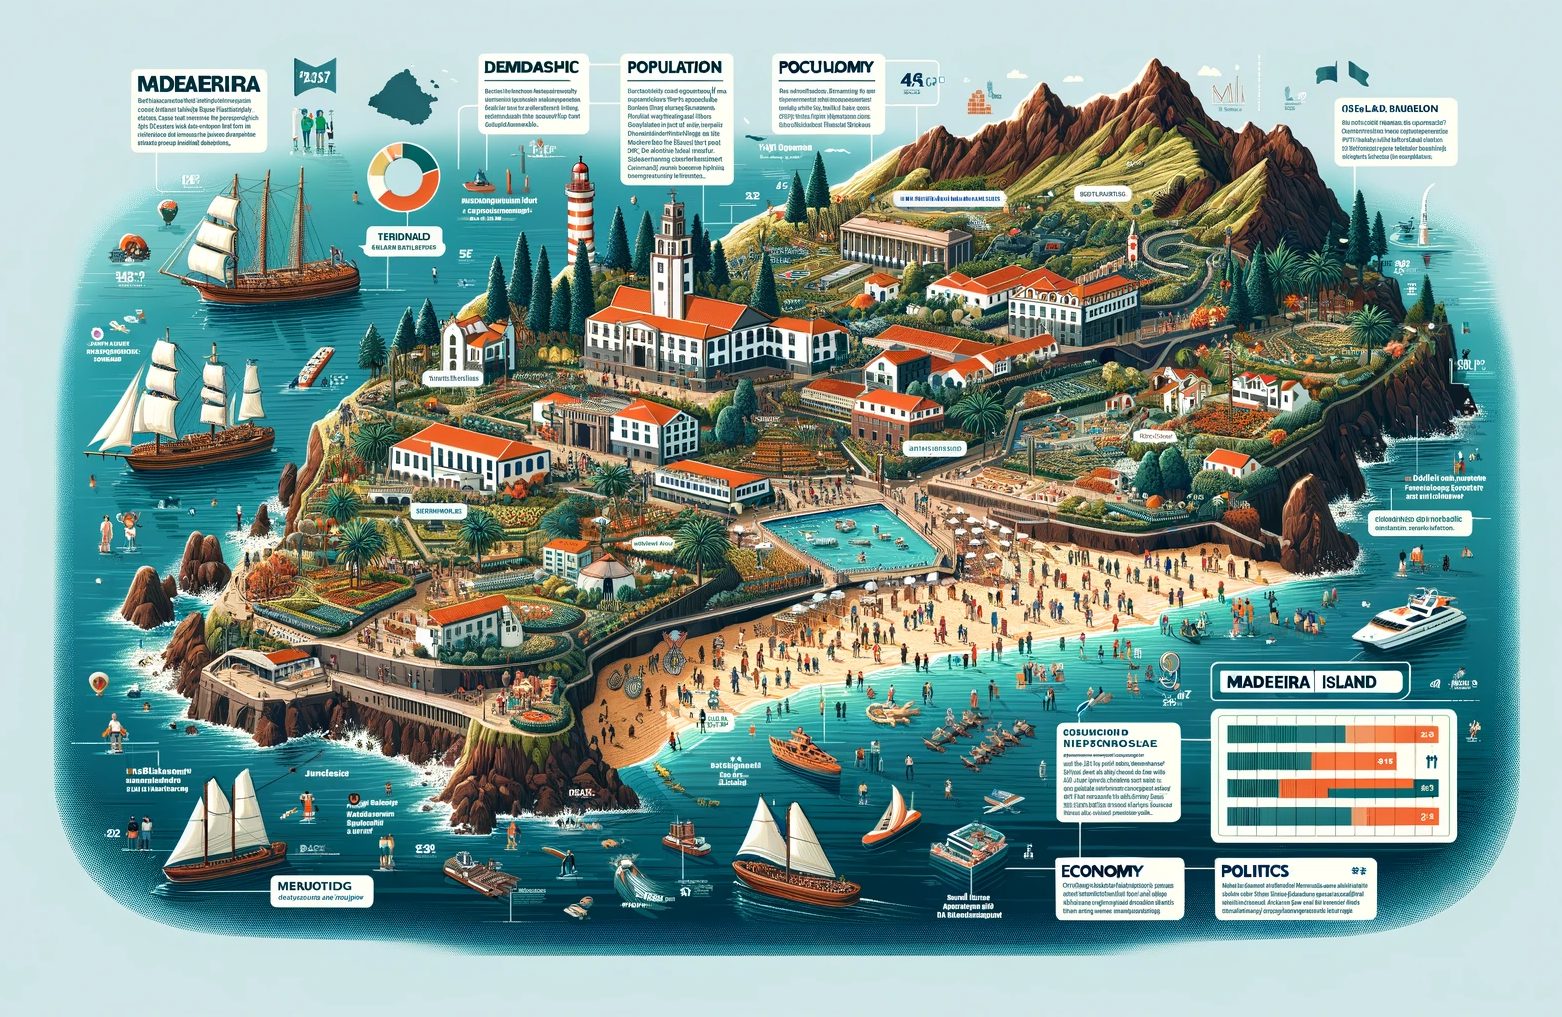 Illustrated infographic poster of Madeira Island's landmarks and data.